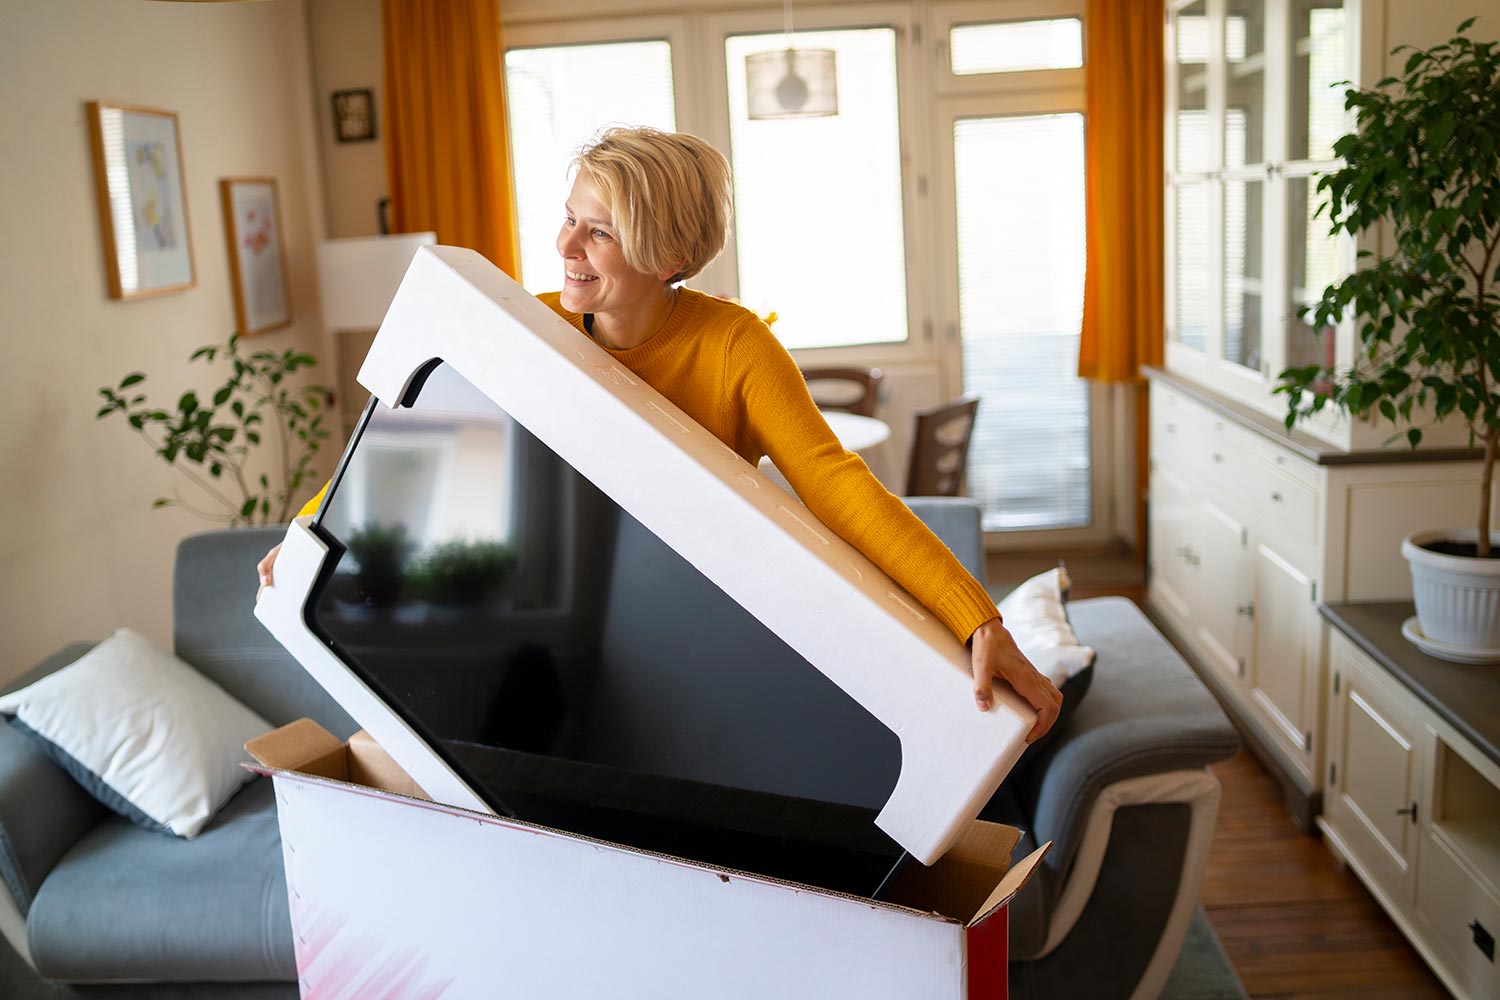 A female online shopper takes delivery of her new television